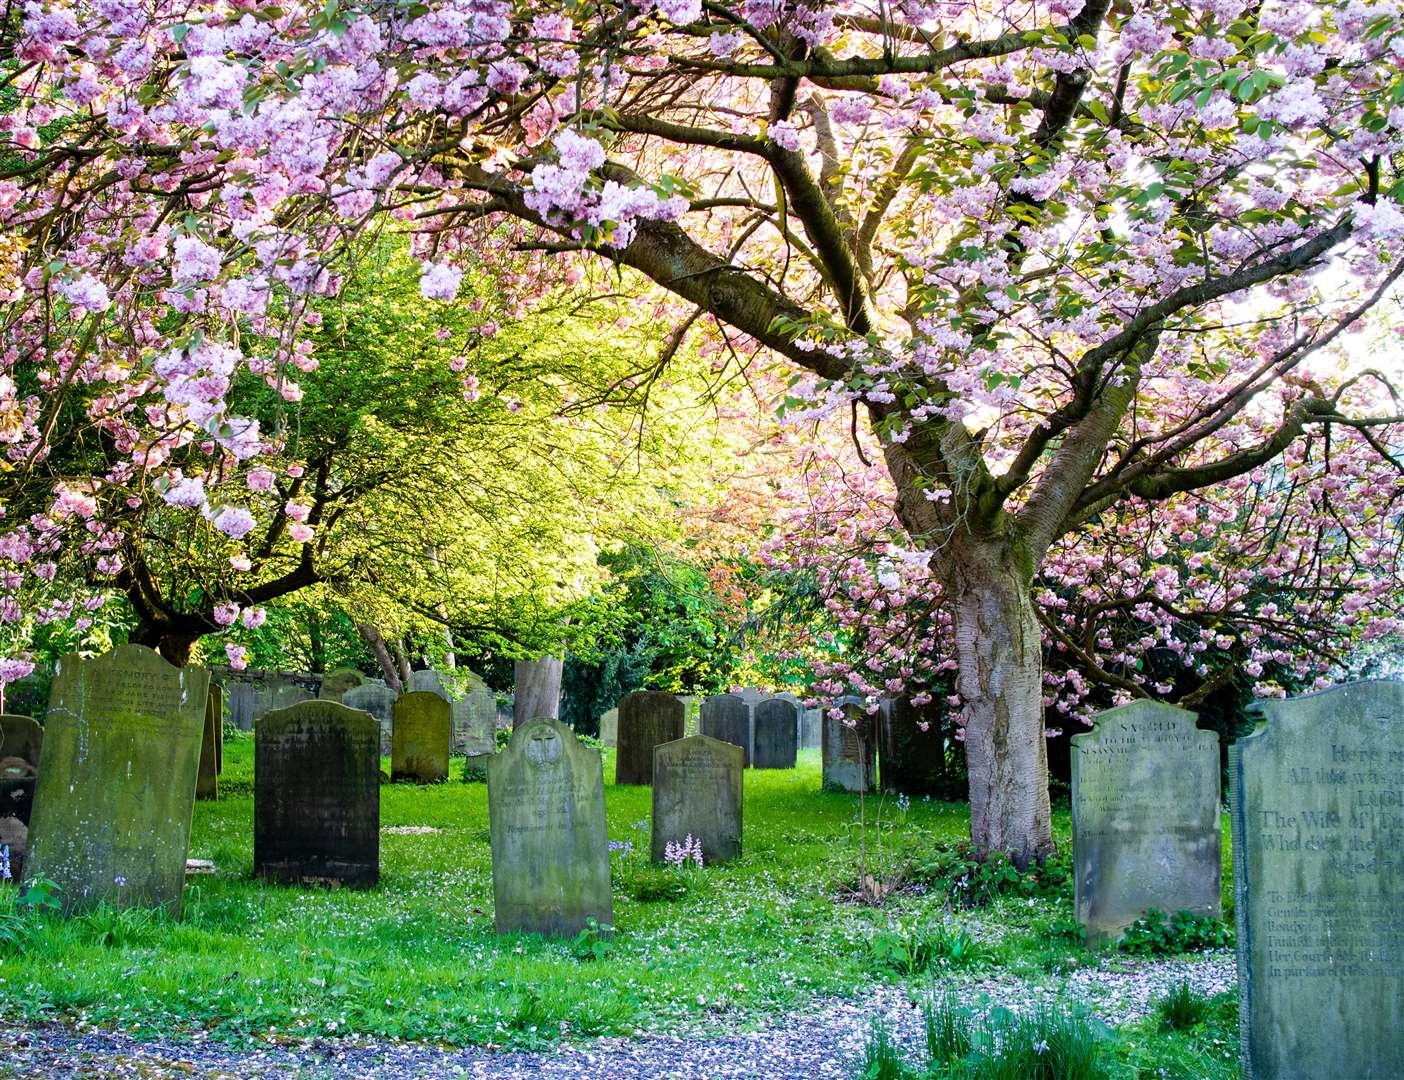 Revised rules for Highland burial grounds and crematorium.